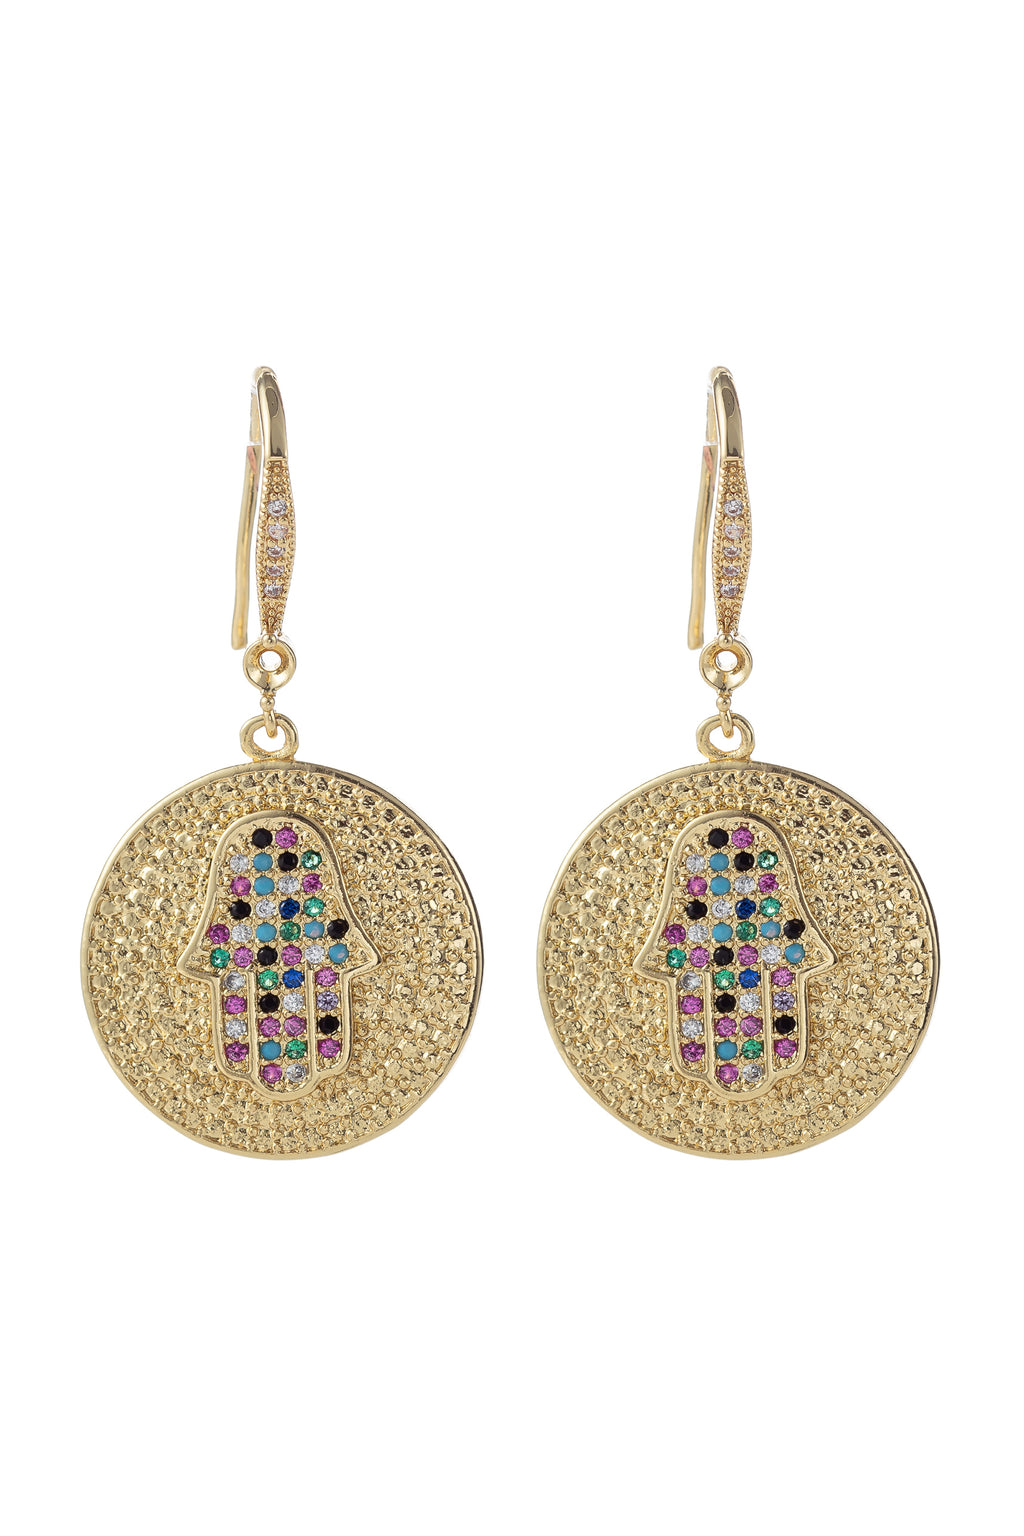 18k gold plated hamsa earrings studded with CZ crystals.